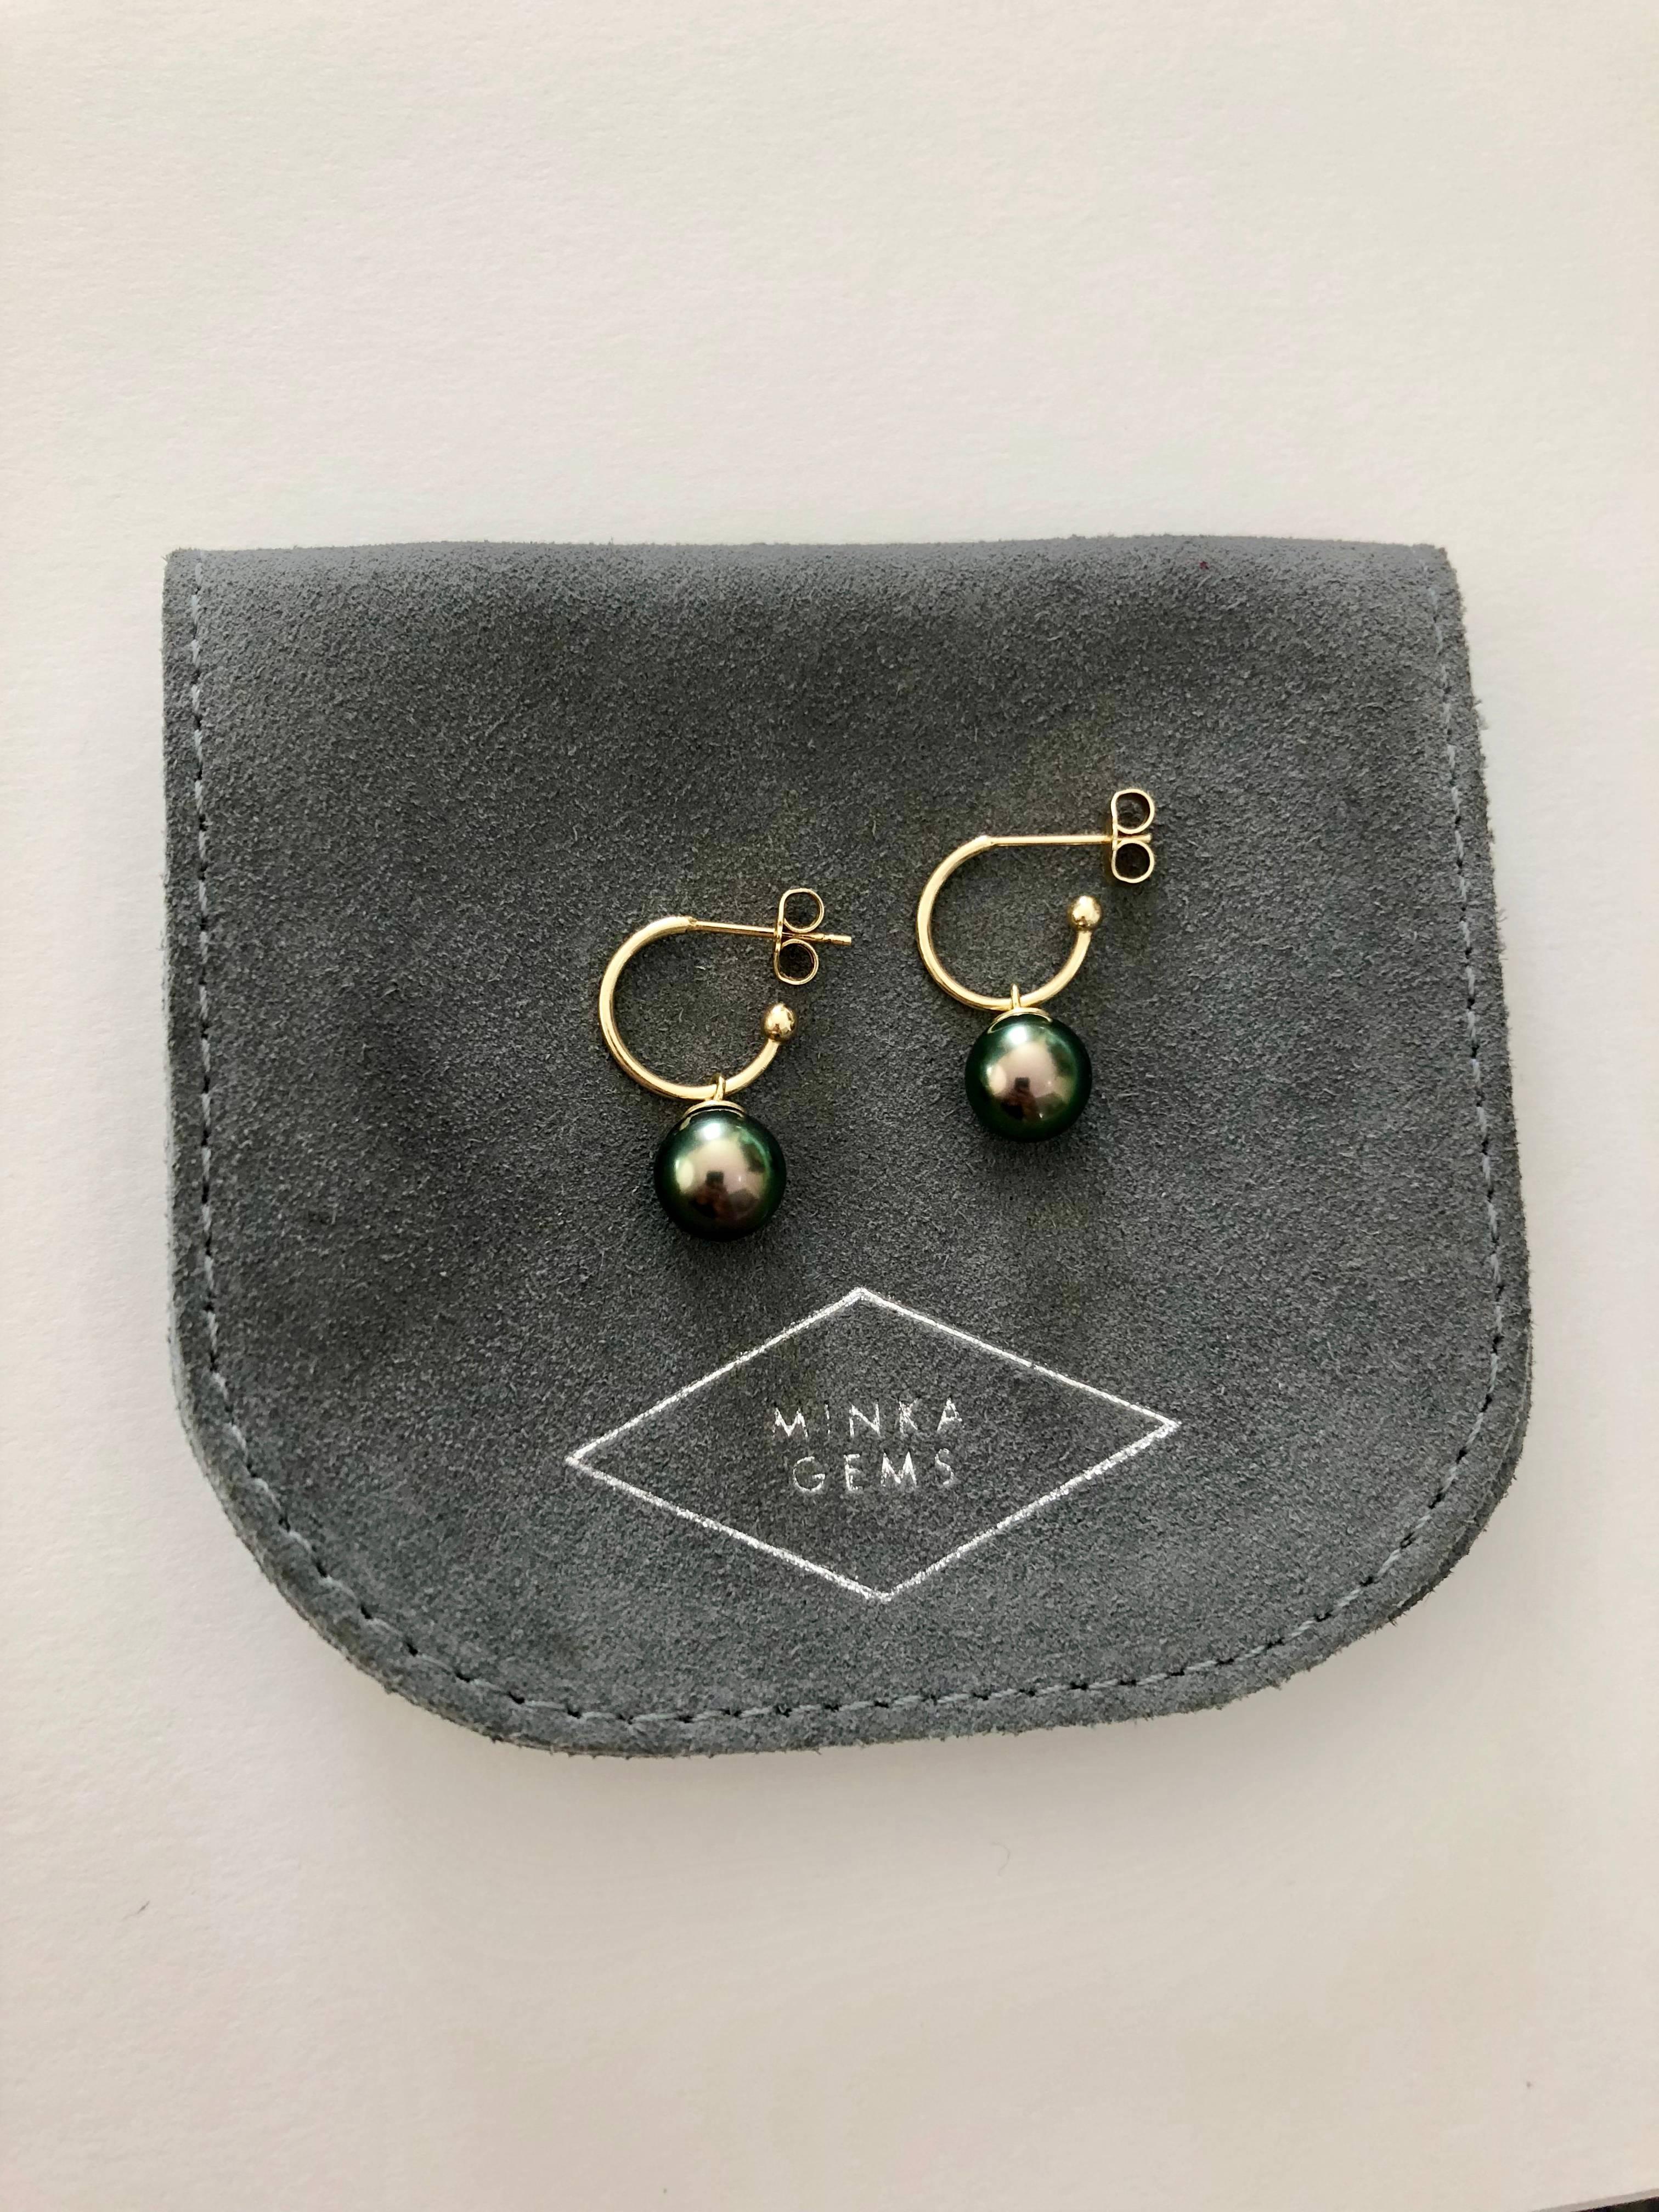 18 Karat gold hoops with removable Tahitian pearl drops. Everyone needs a pair of gold hoops, and to have a pair of Tahitian pearls to take the look one step further. Elegant and timeless this pair will soon be your favourite go to earrings.